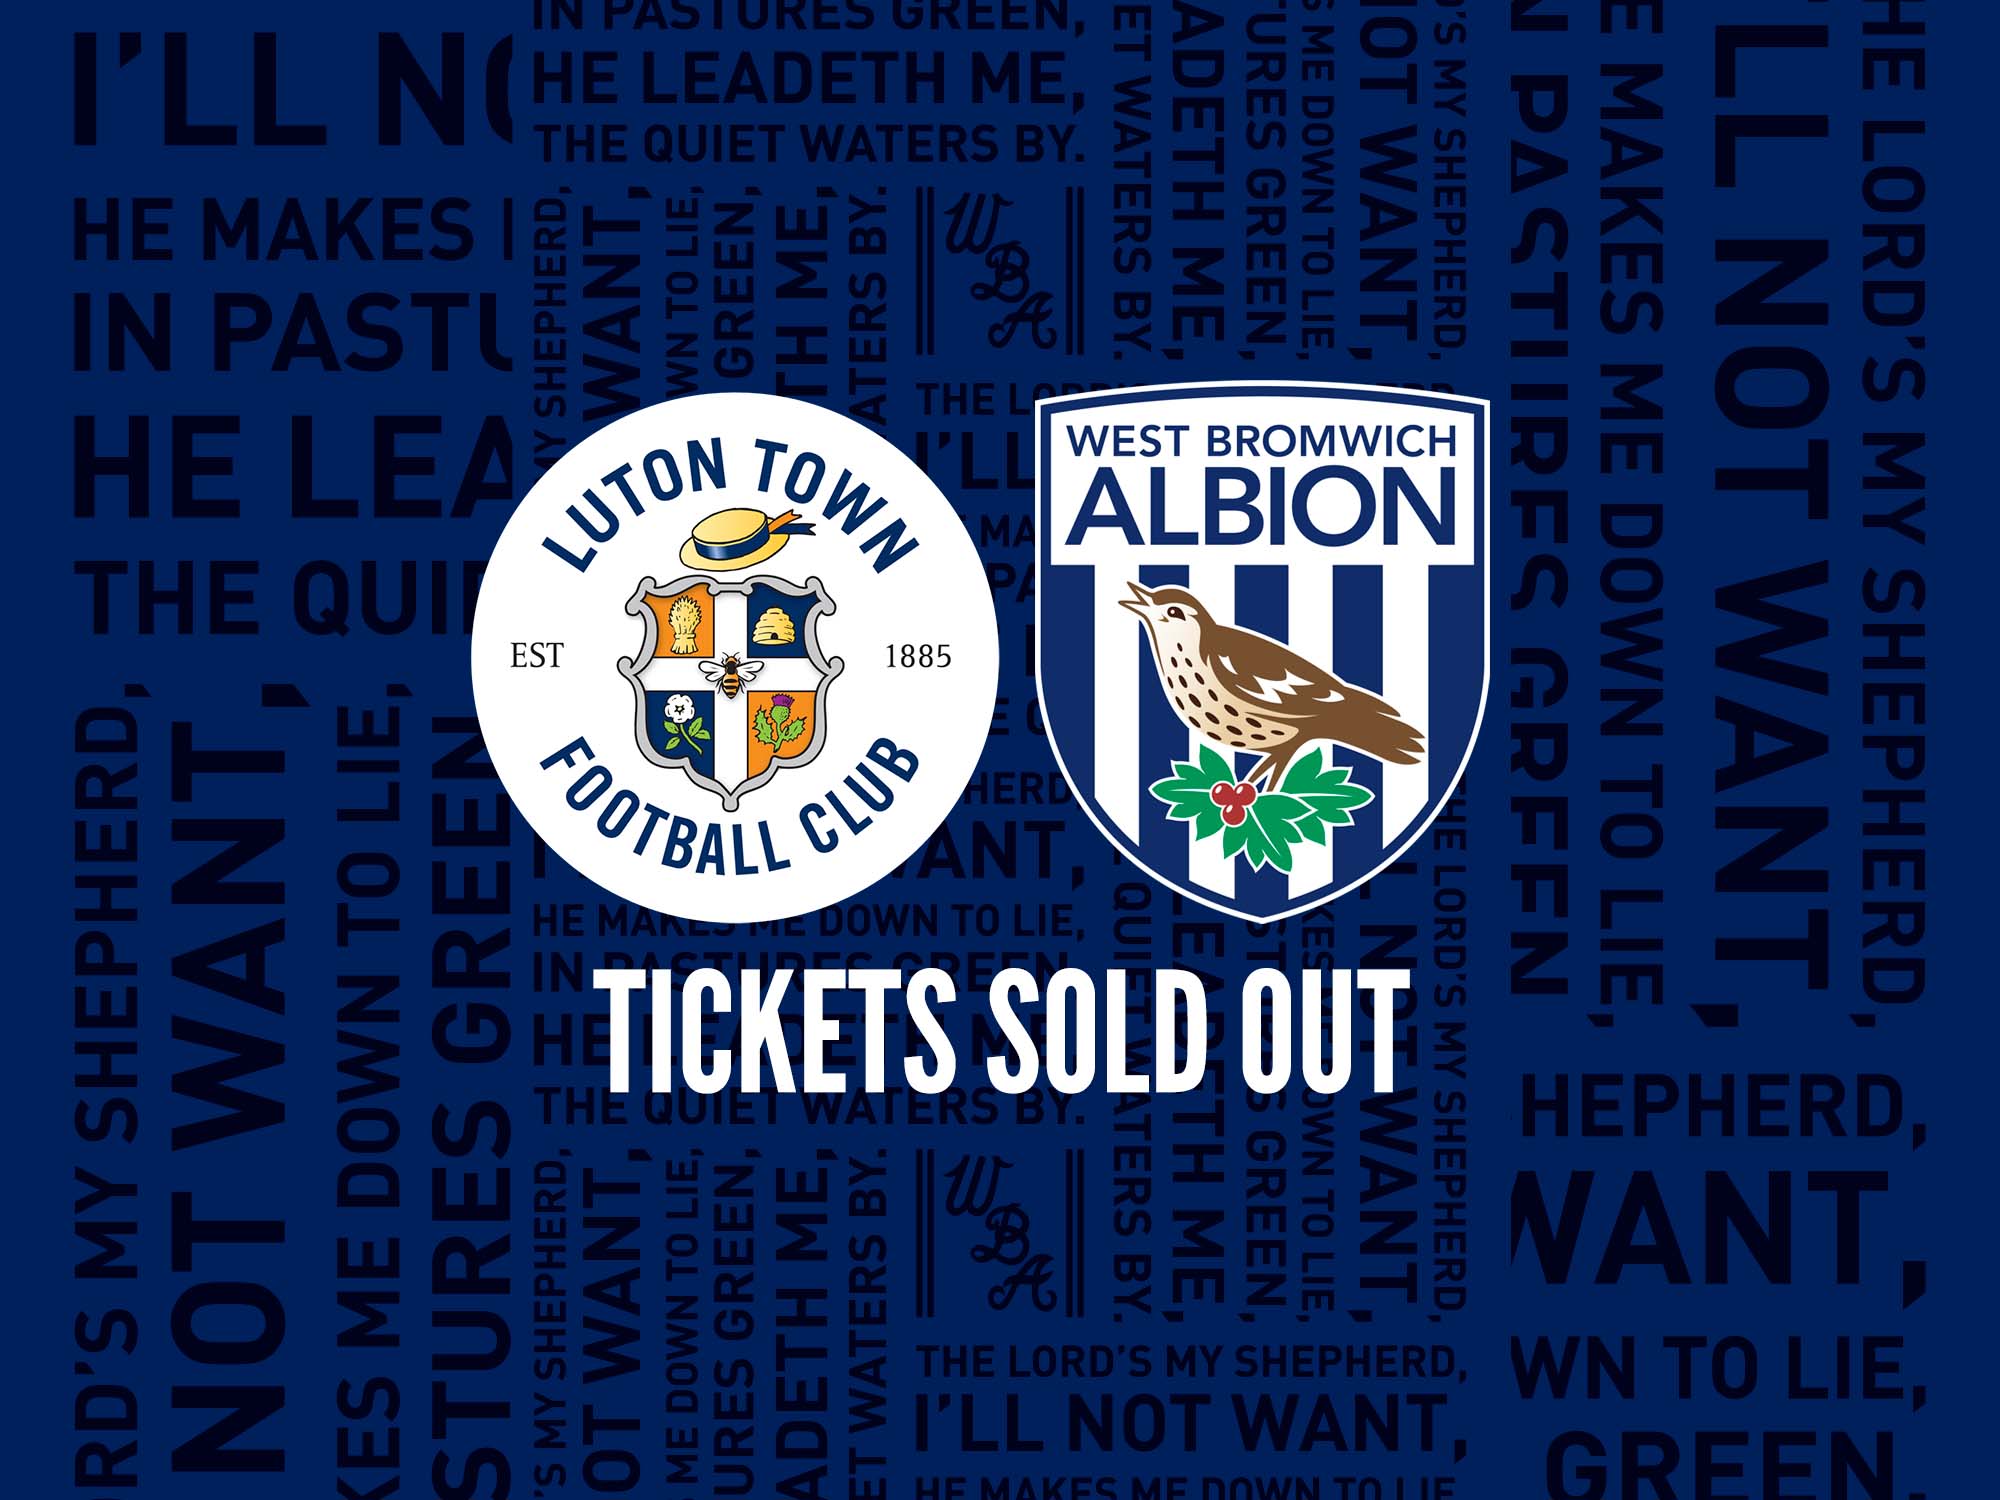 Luton sold out tickets